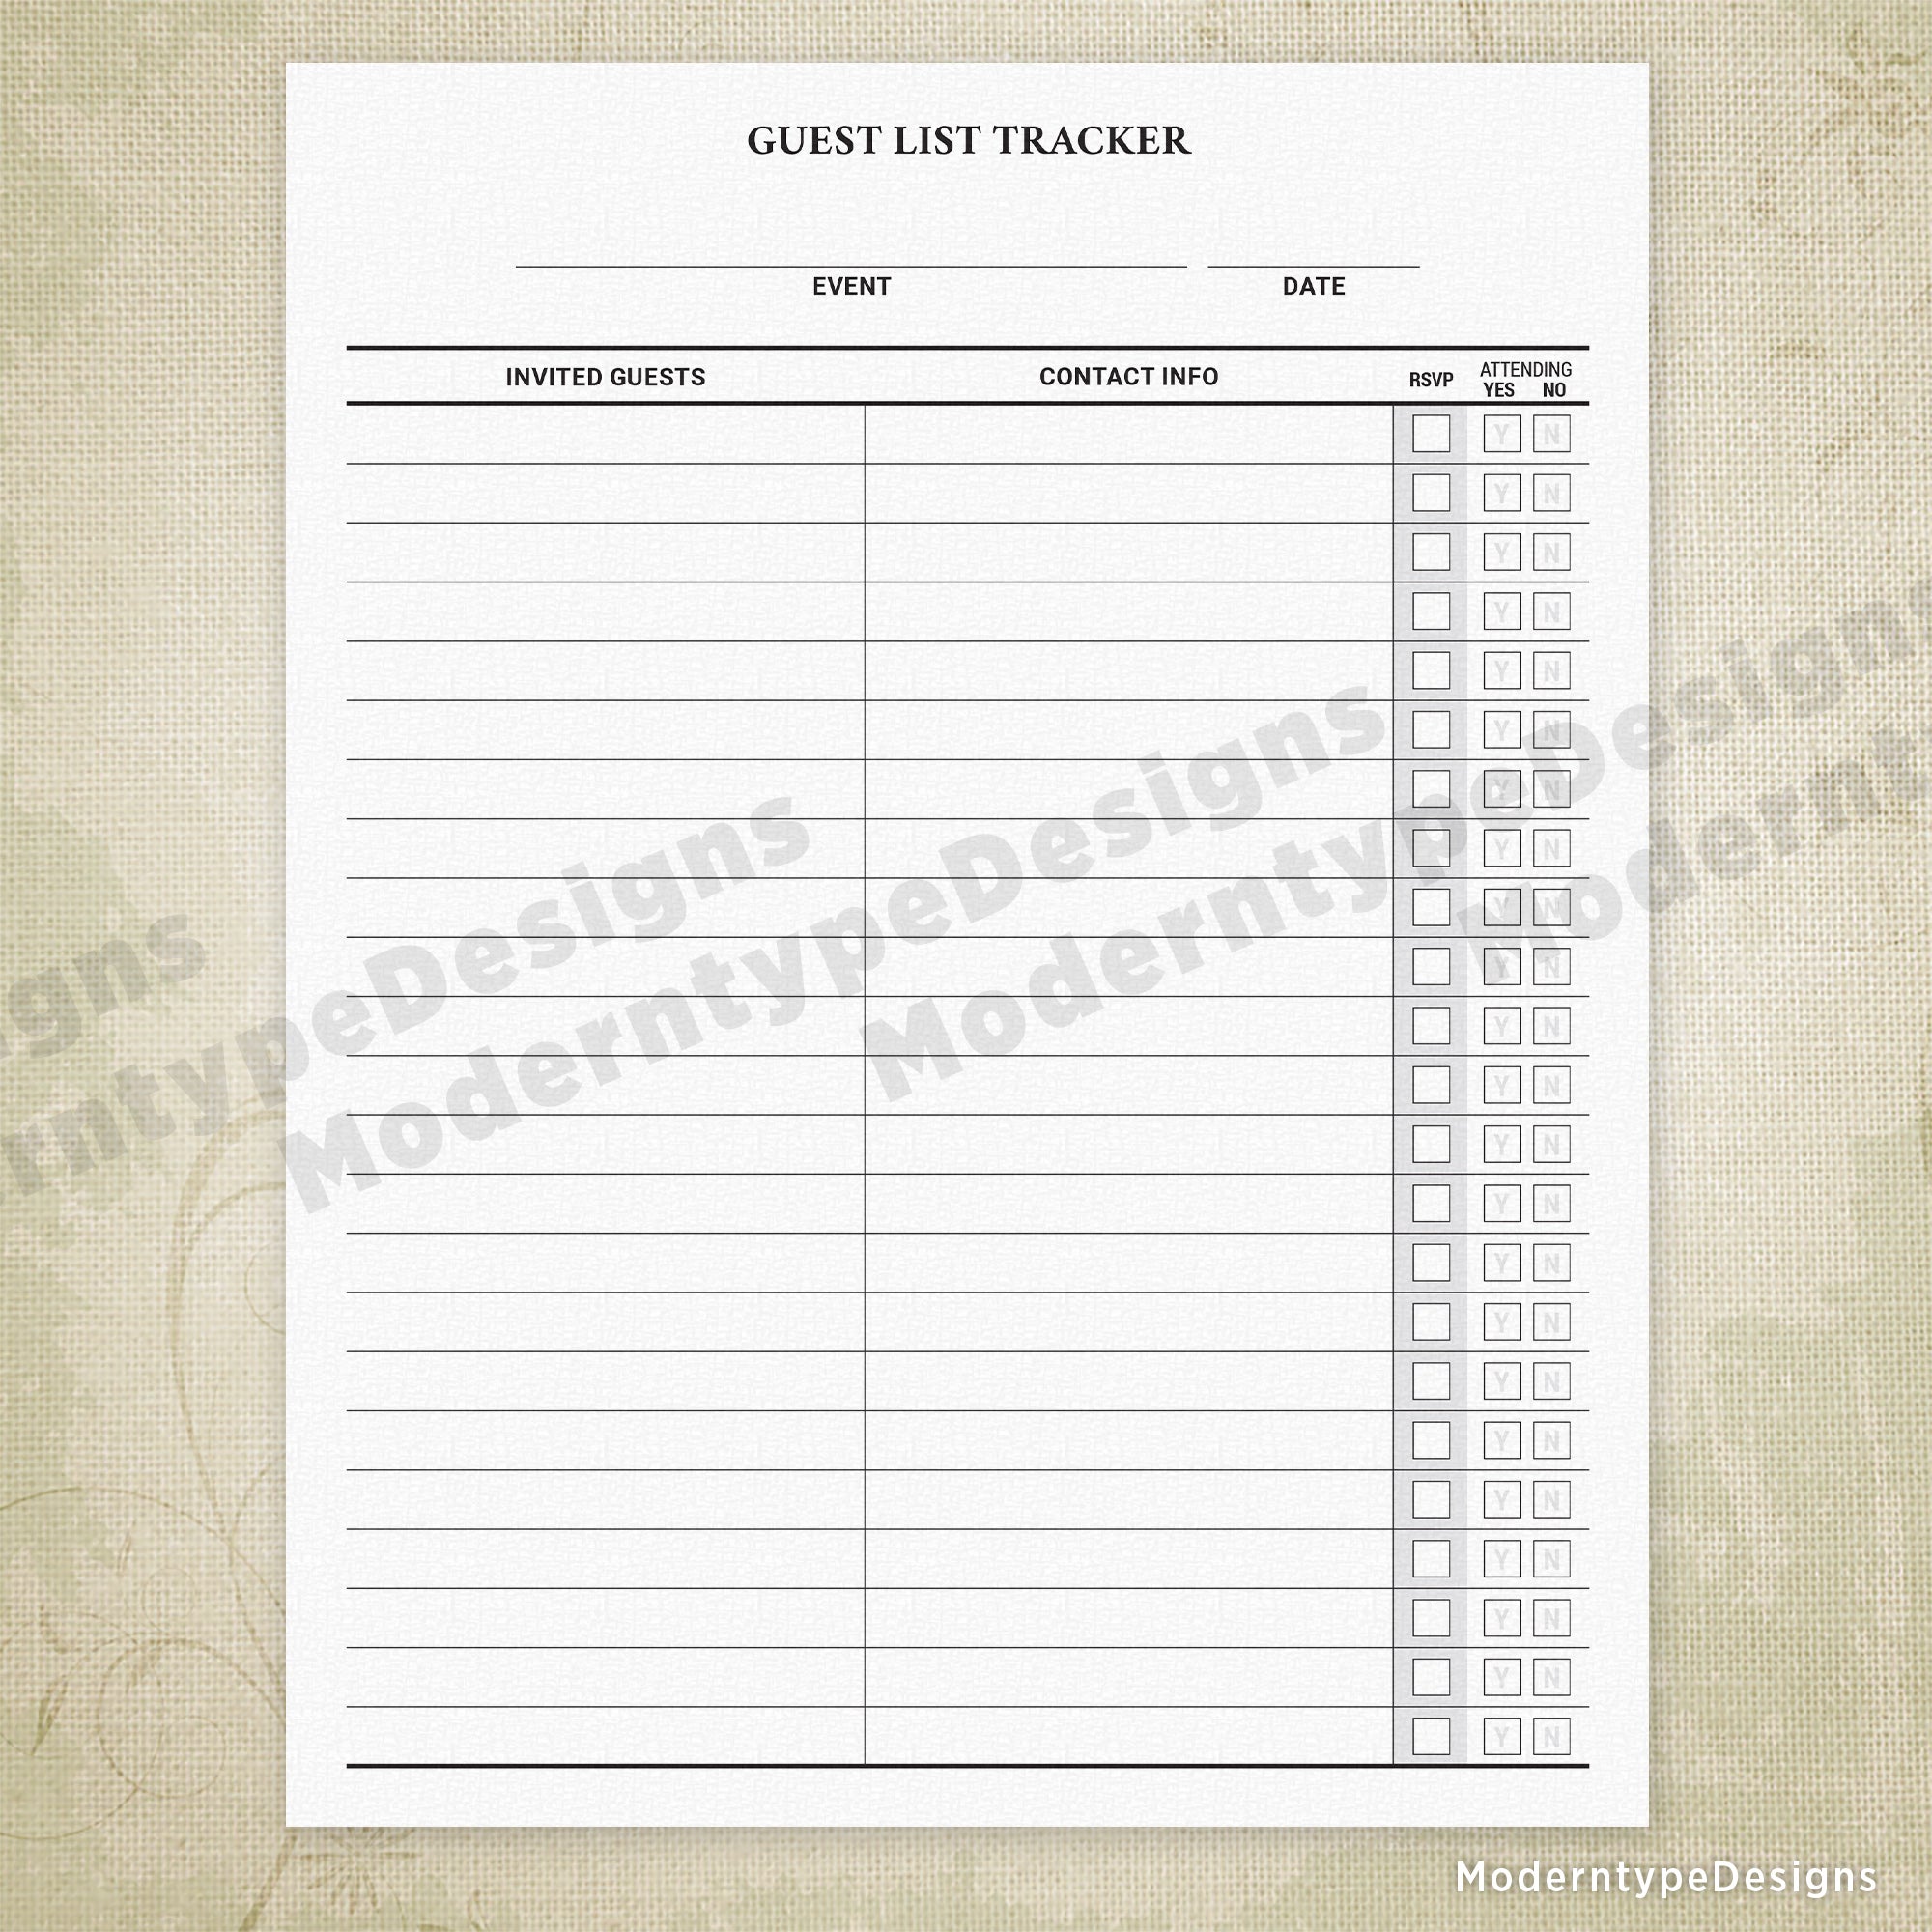 Guest List Tracker Printable Form